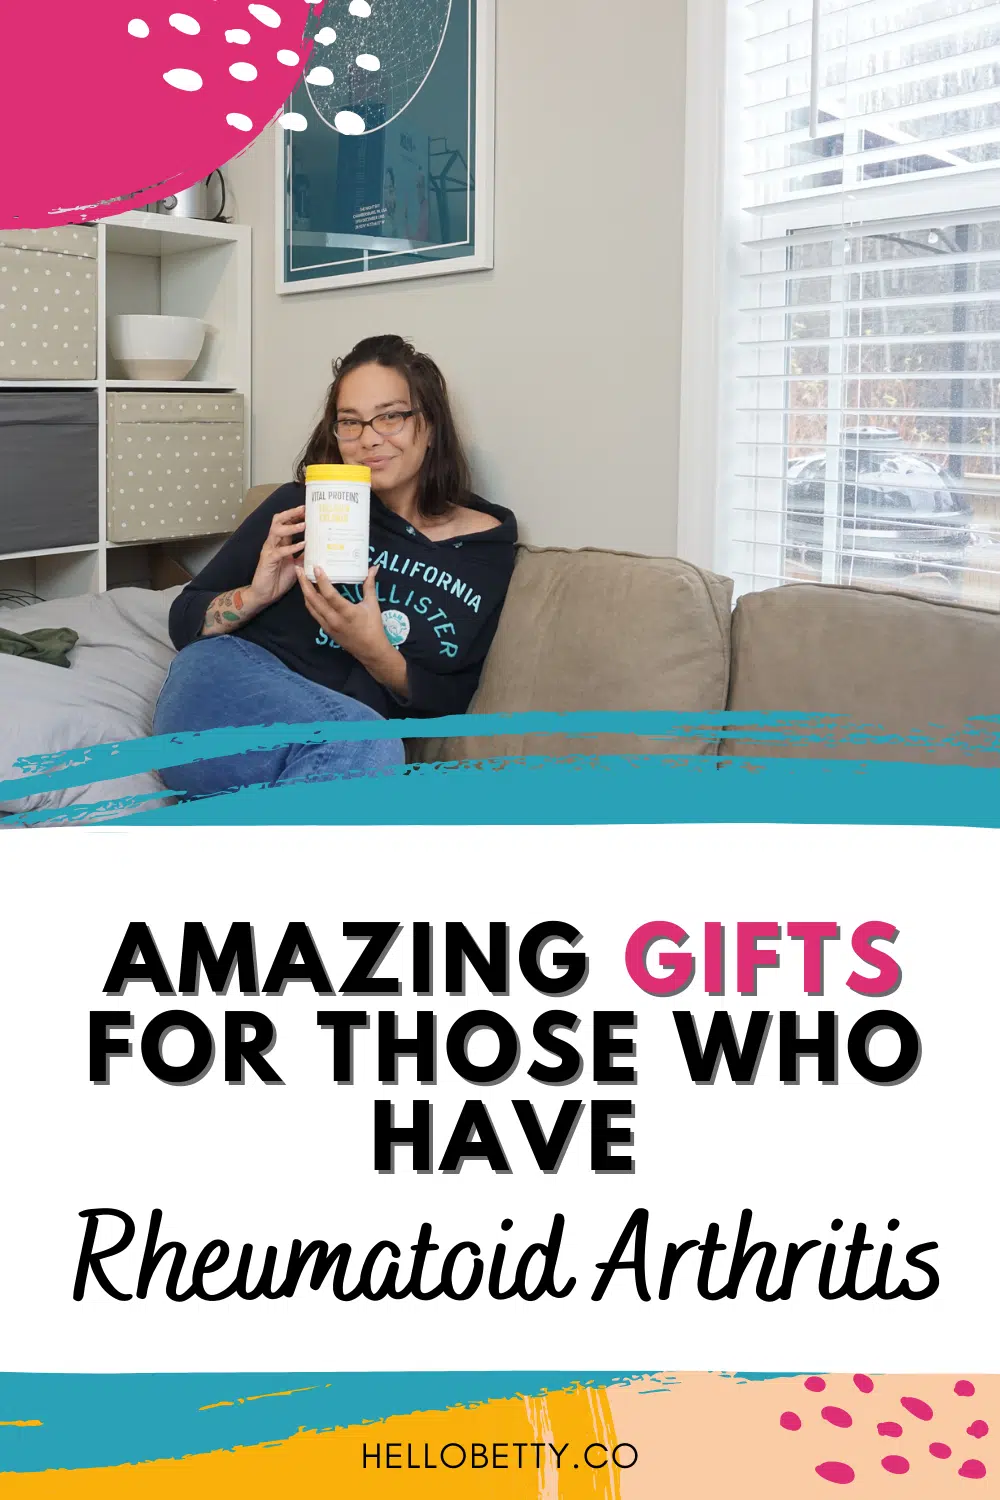 The Perfect Gifts For Those Who Have Rheumatoid Arthritis